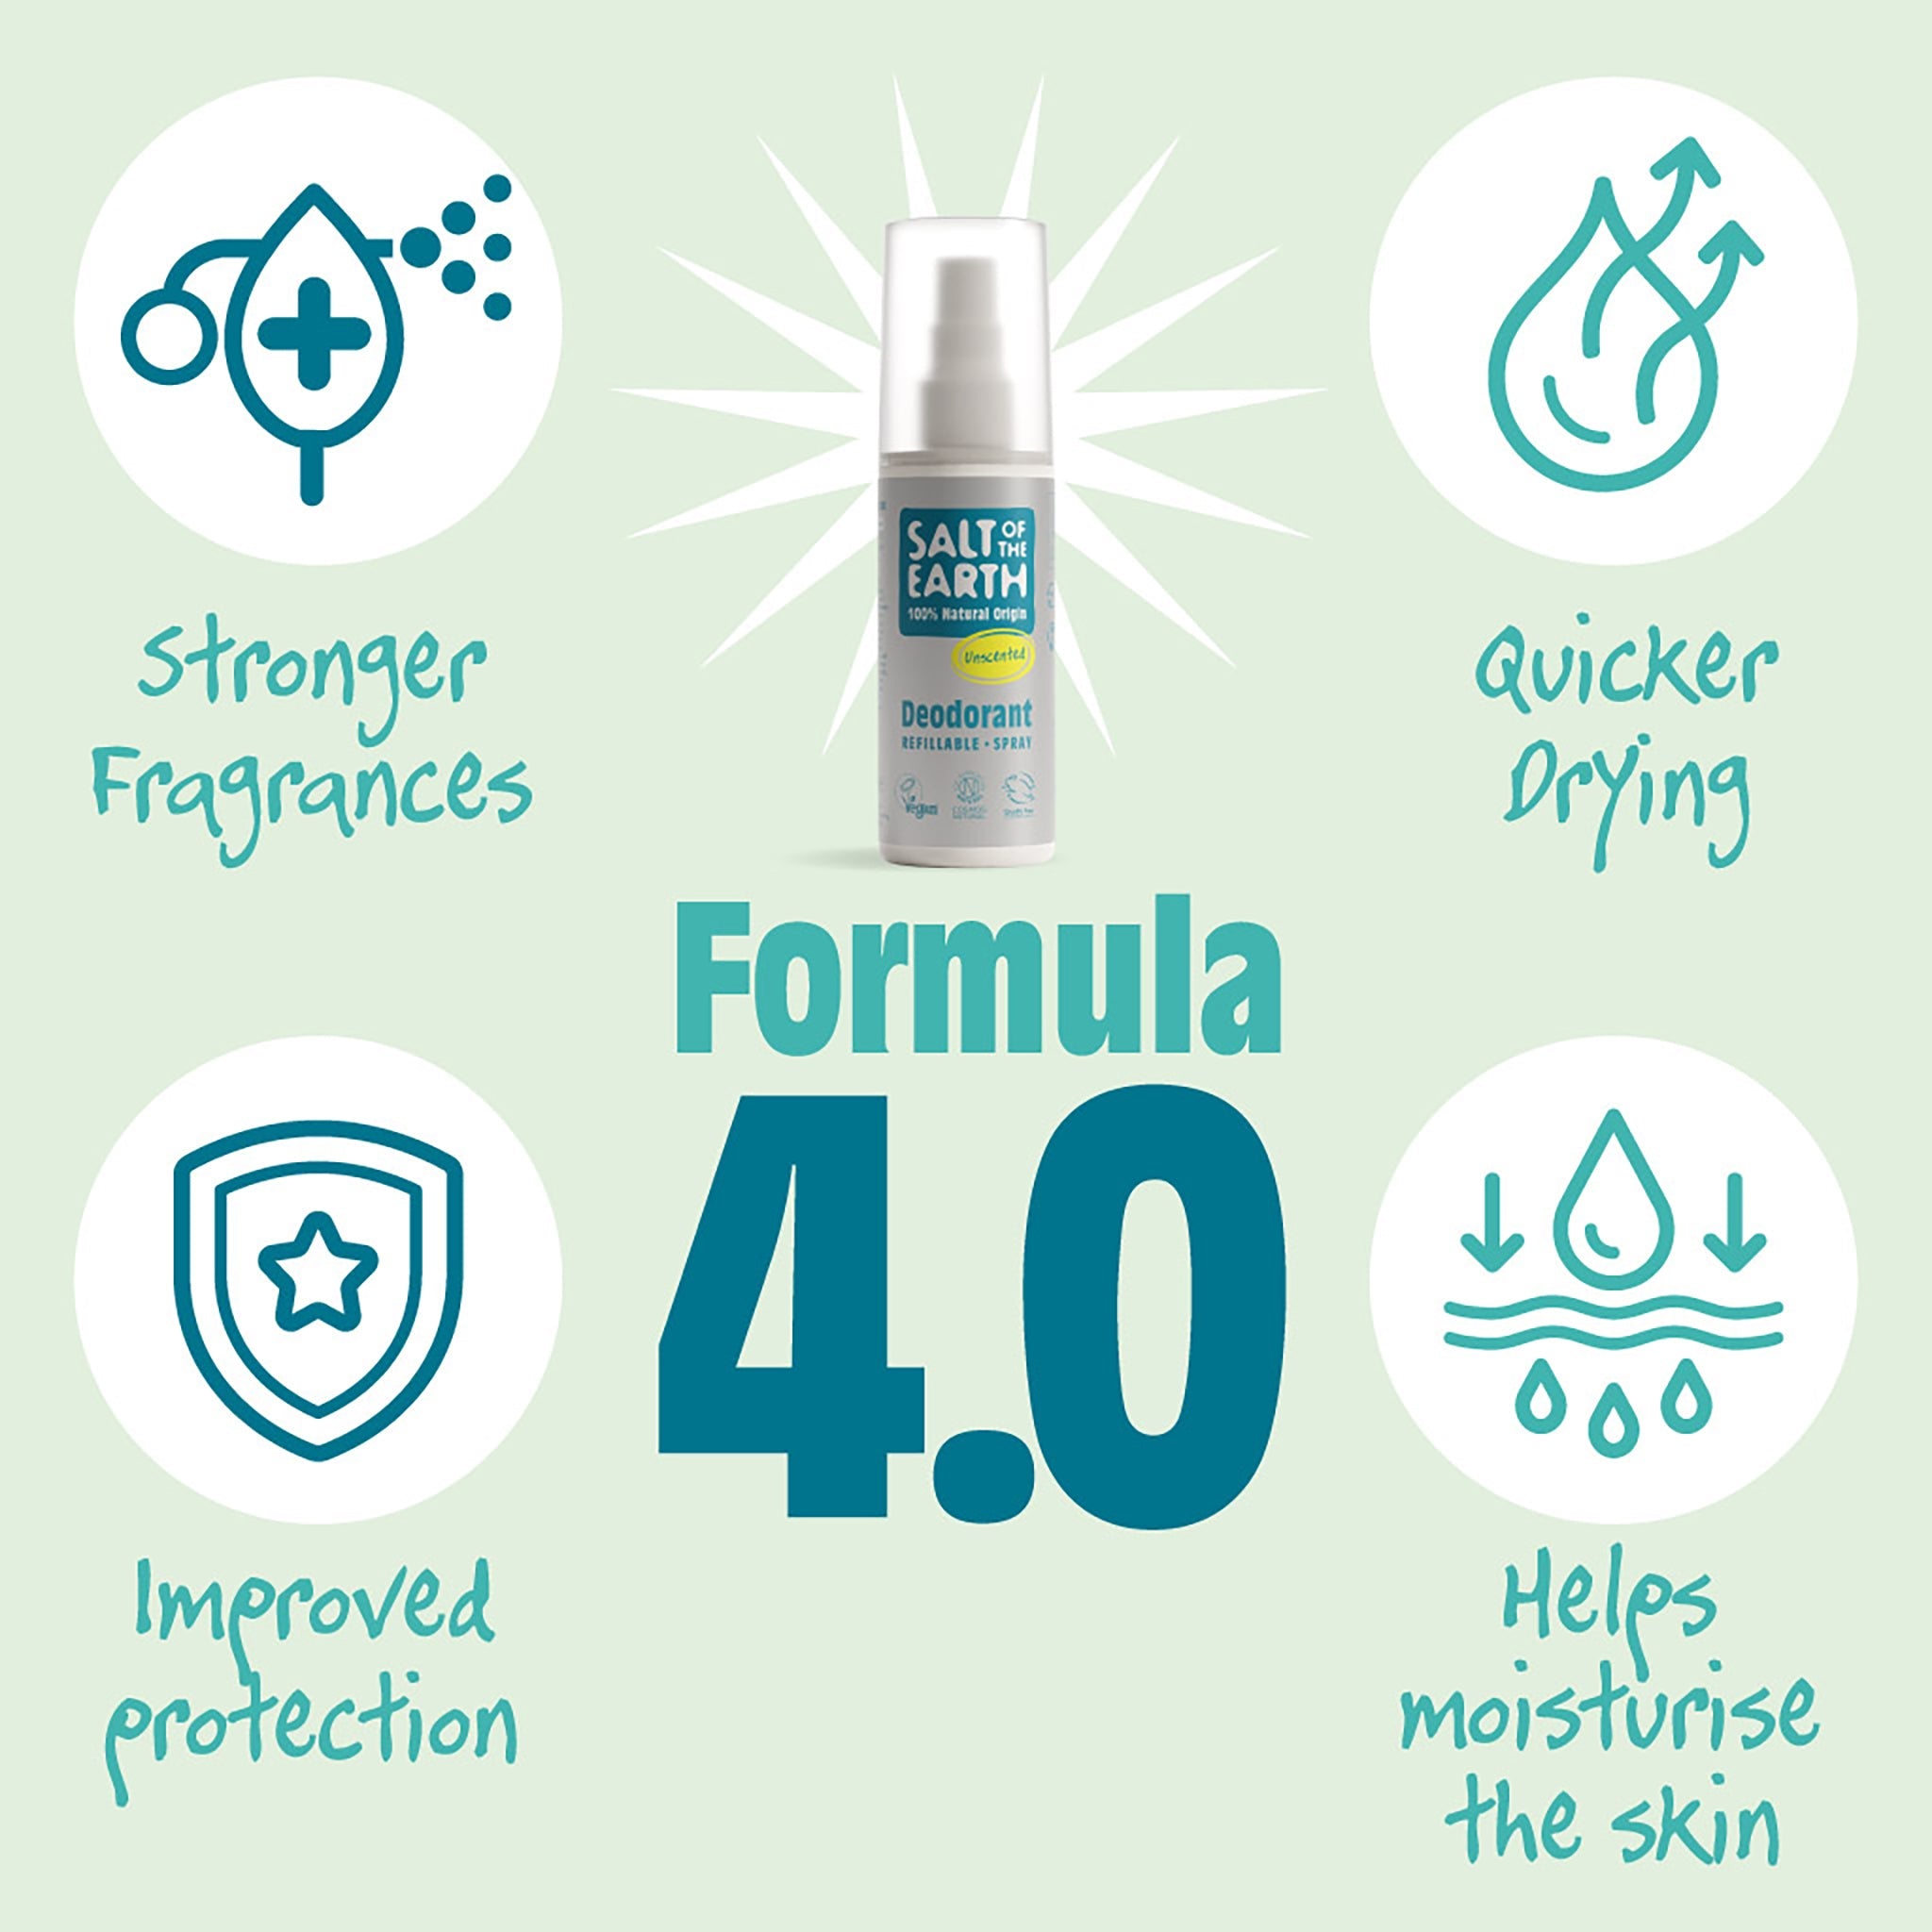 Natural Deodorant Spray | Unscented - mypure.co.uk